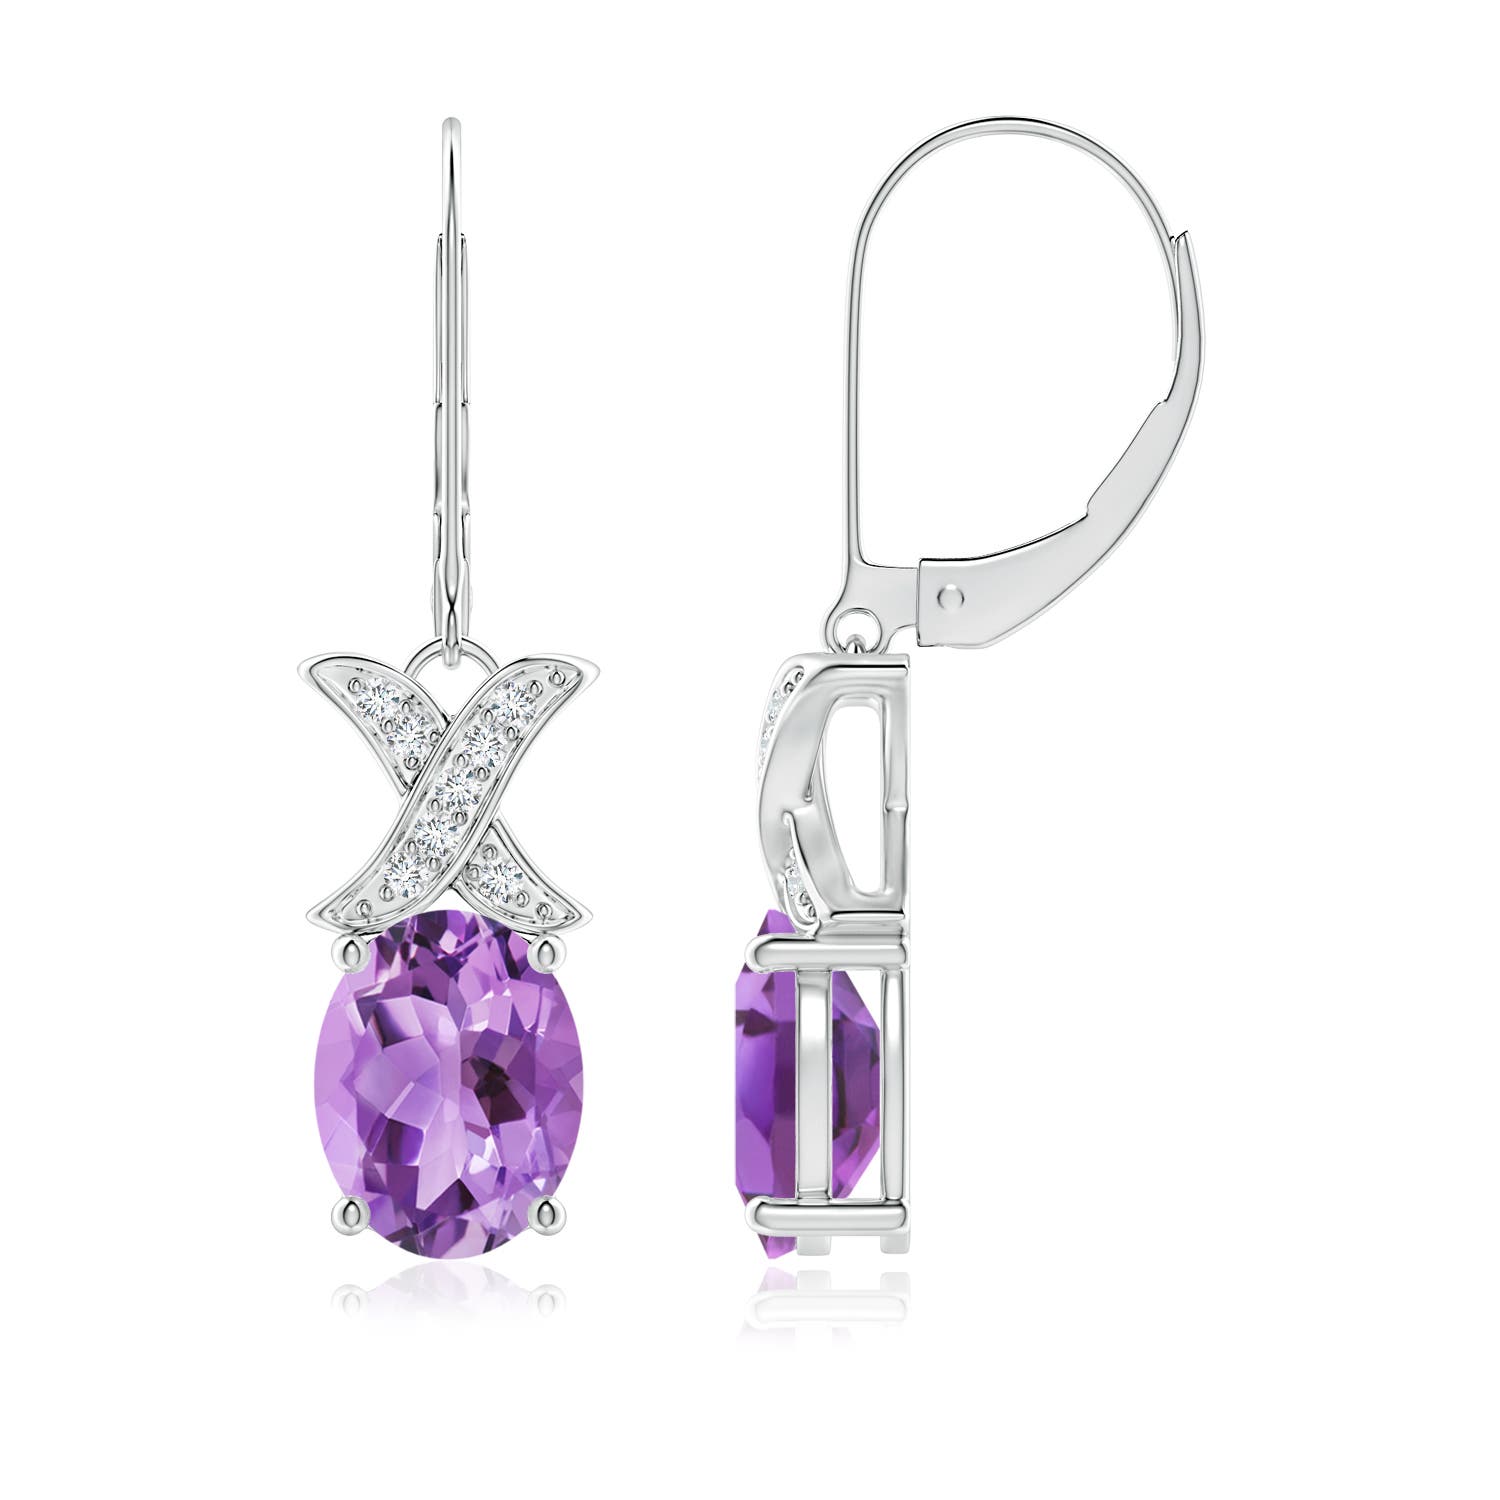 A - Amethyst / 3.3 CT / 14 KT White Gold